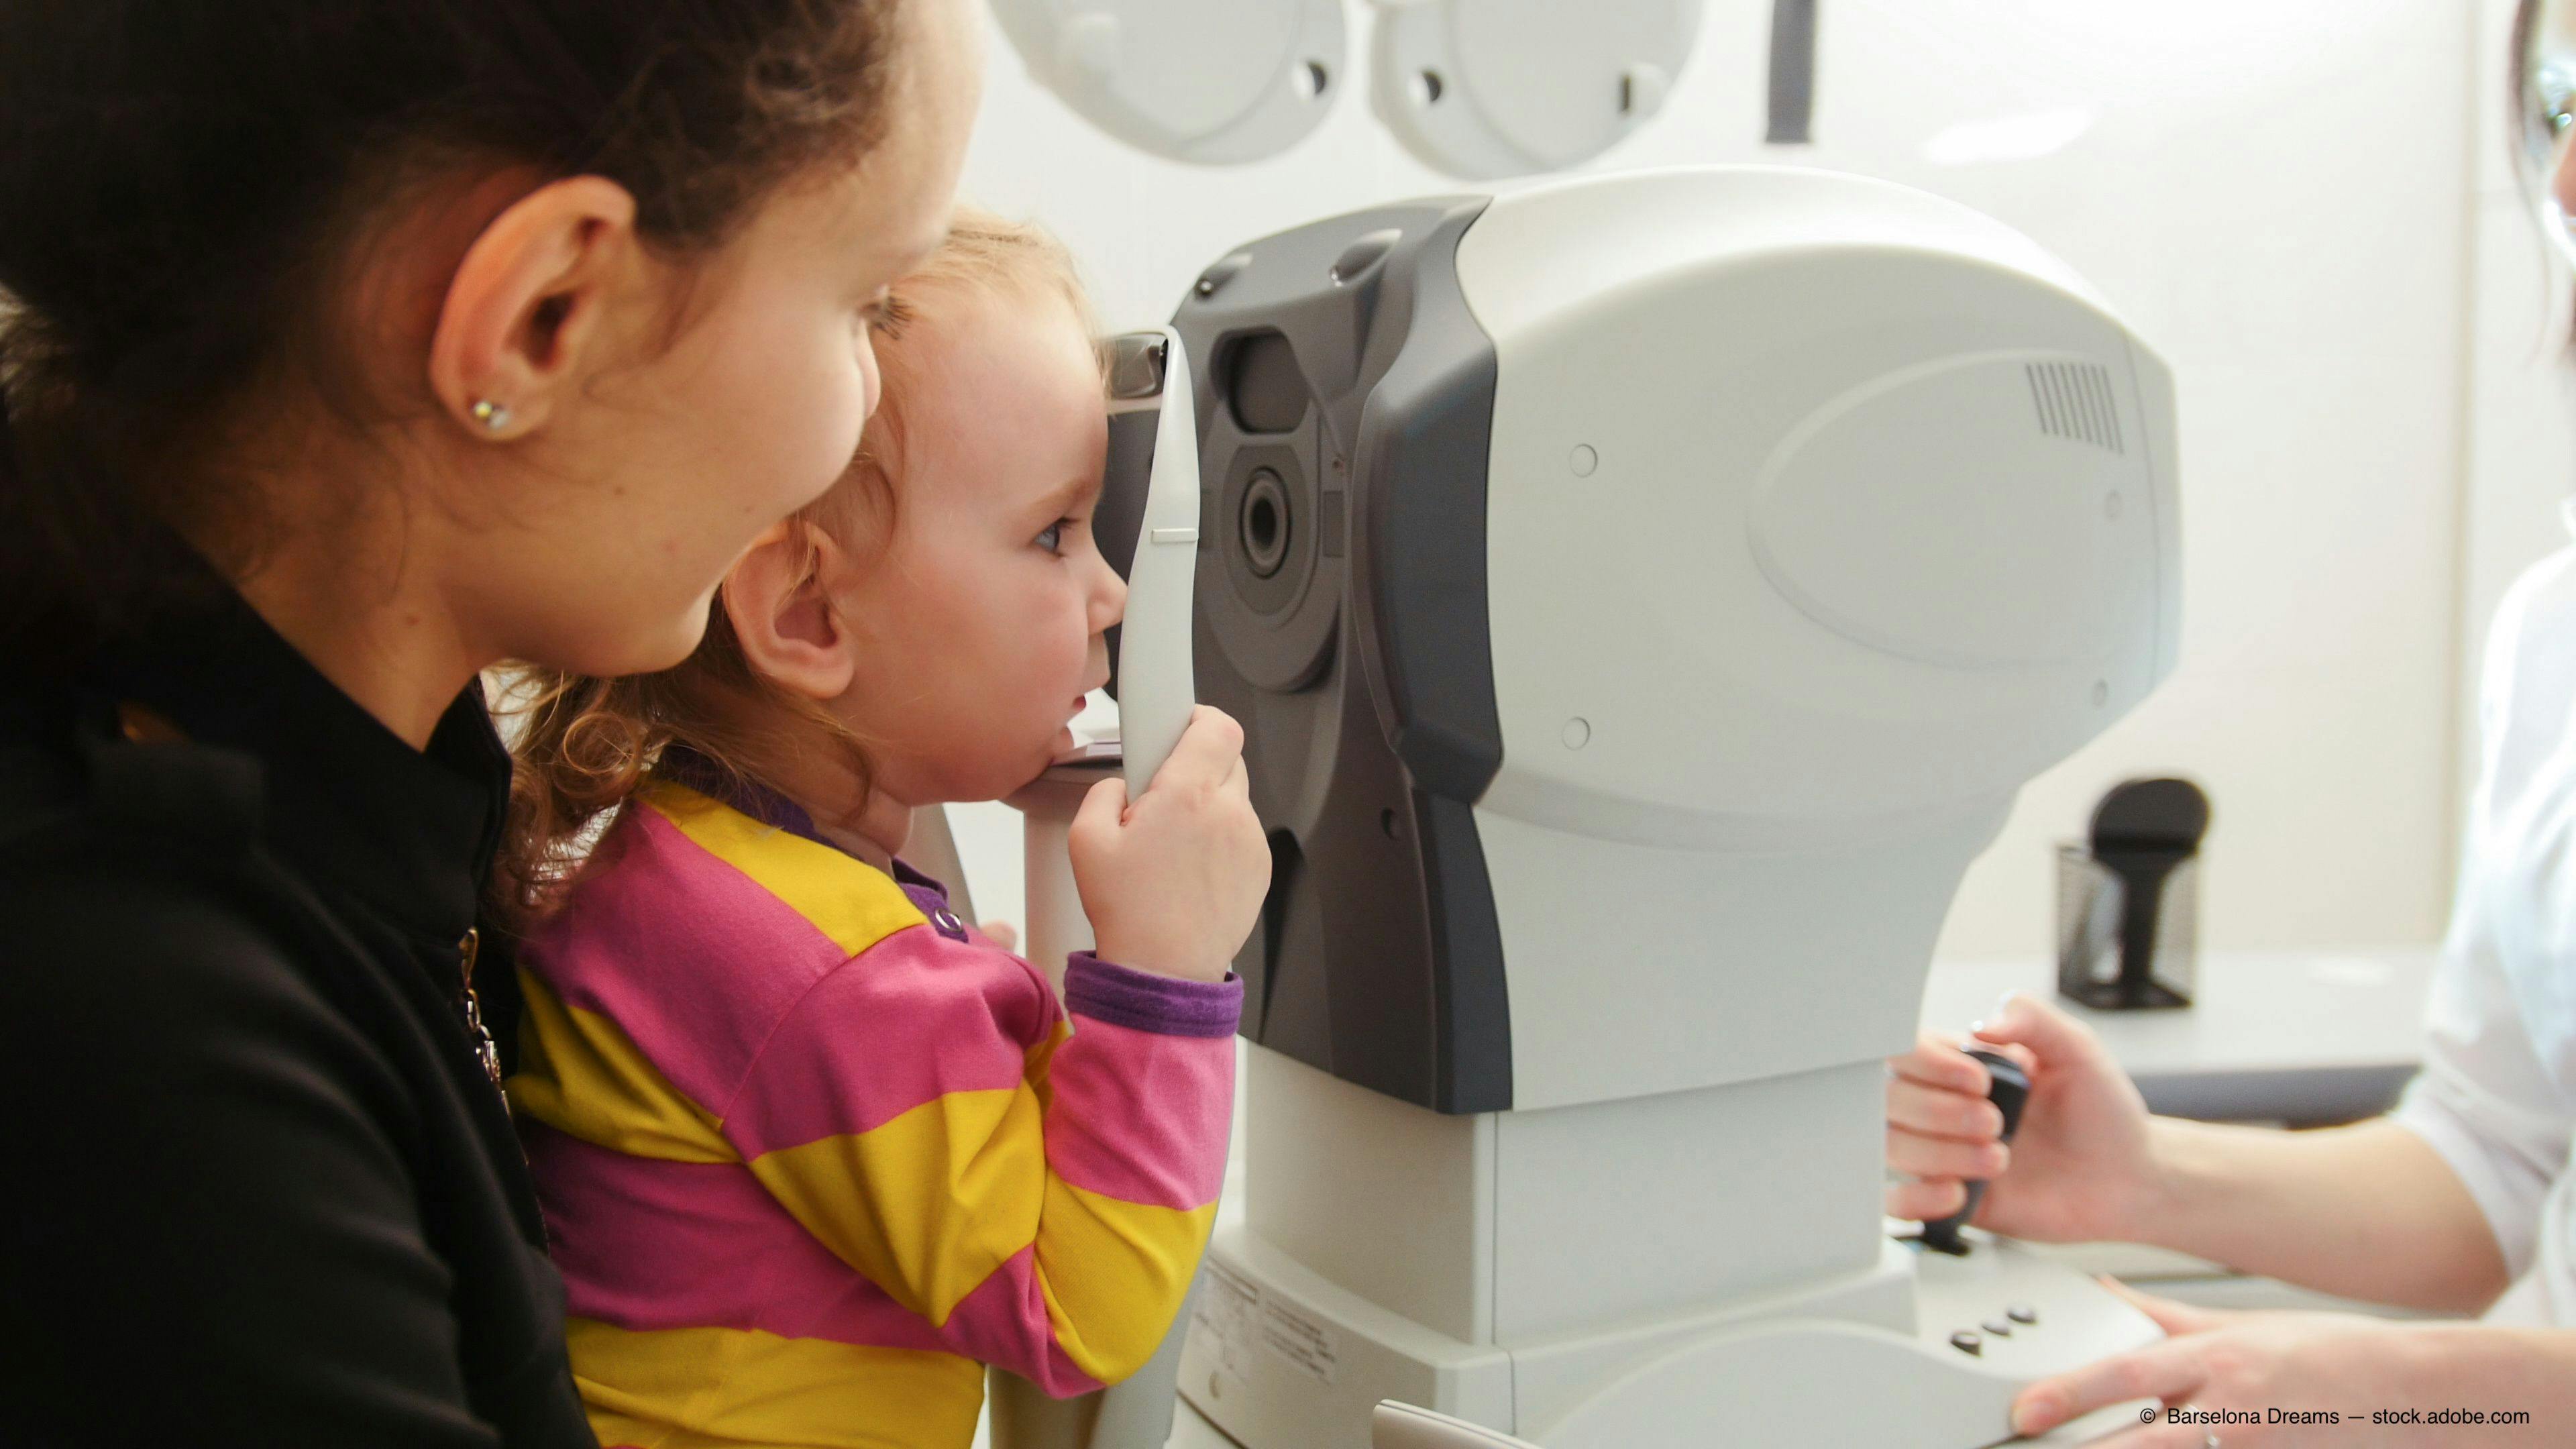 It takes a village to beat visual system diseases in children